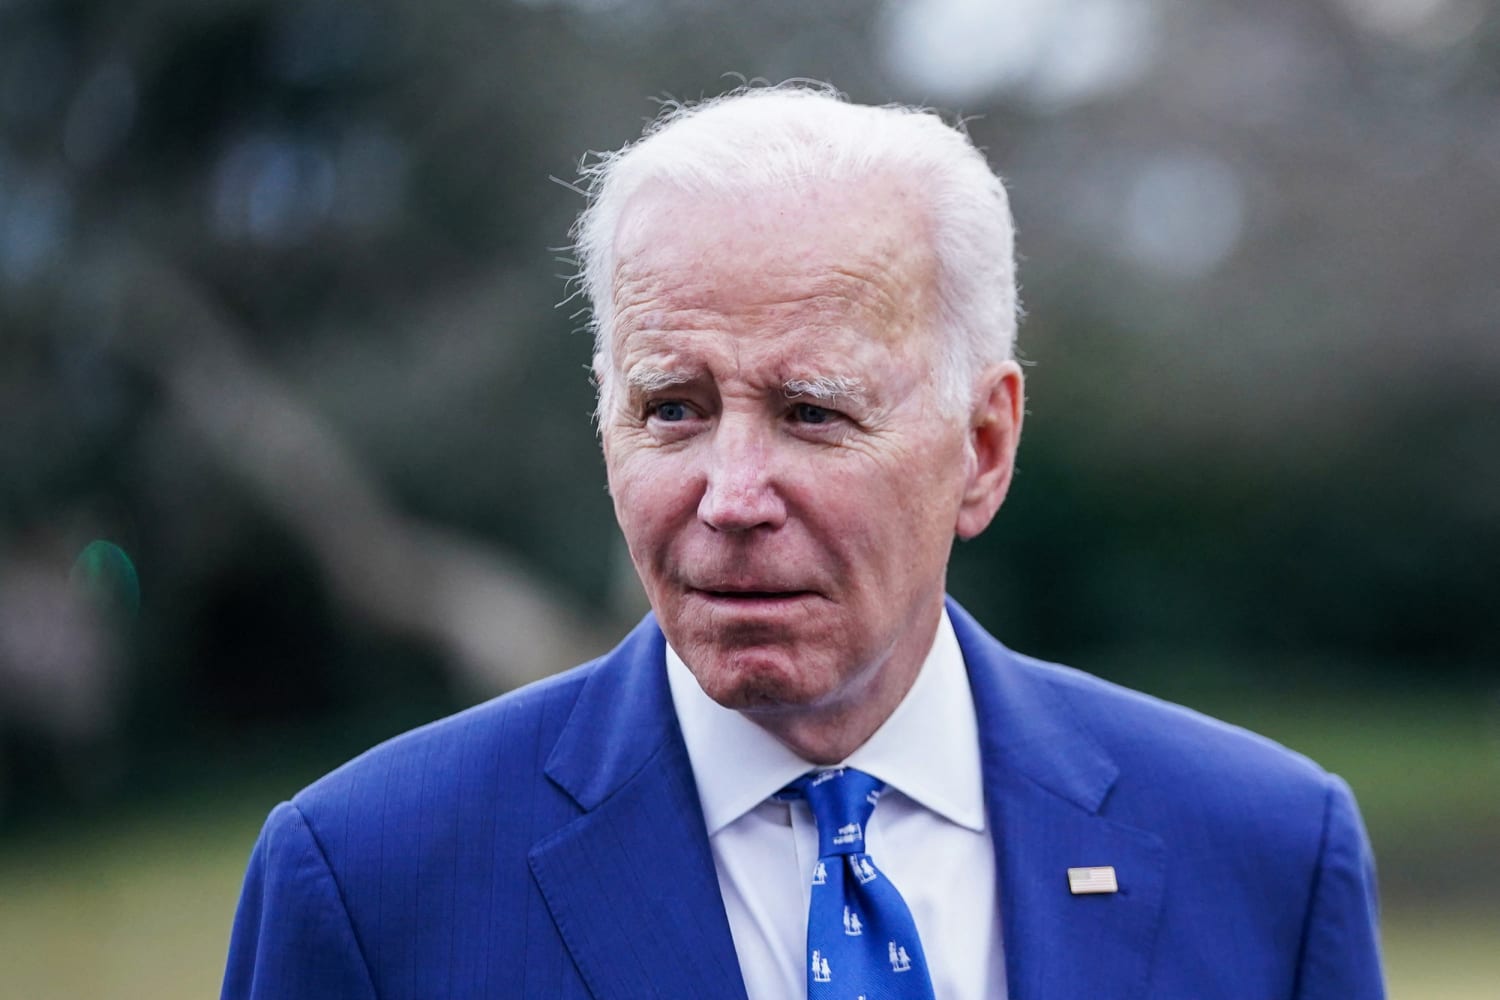 Justice Department is examining a ‘small number’ of classified documents found at Biden think tank